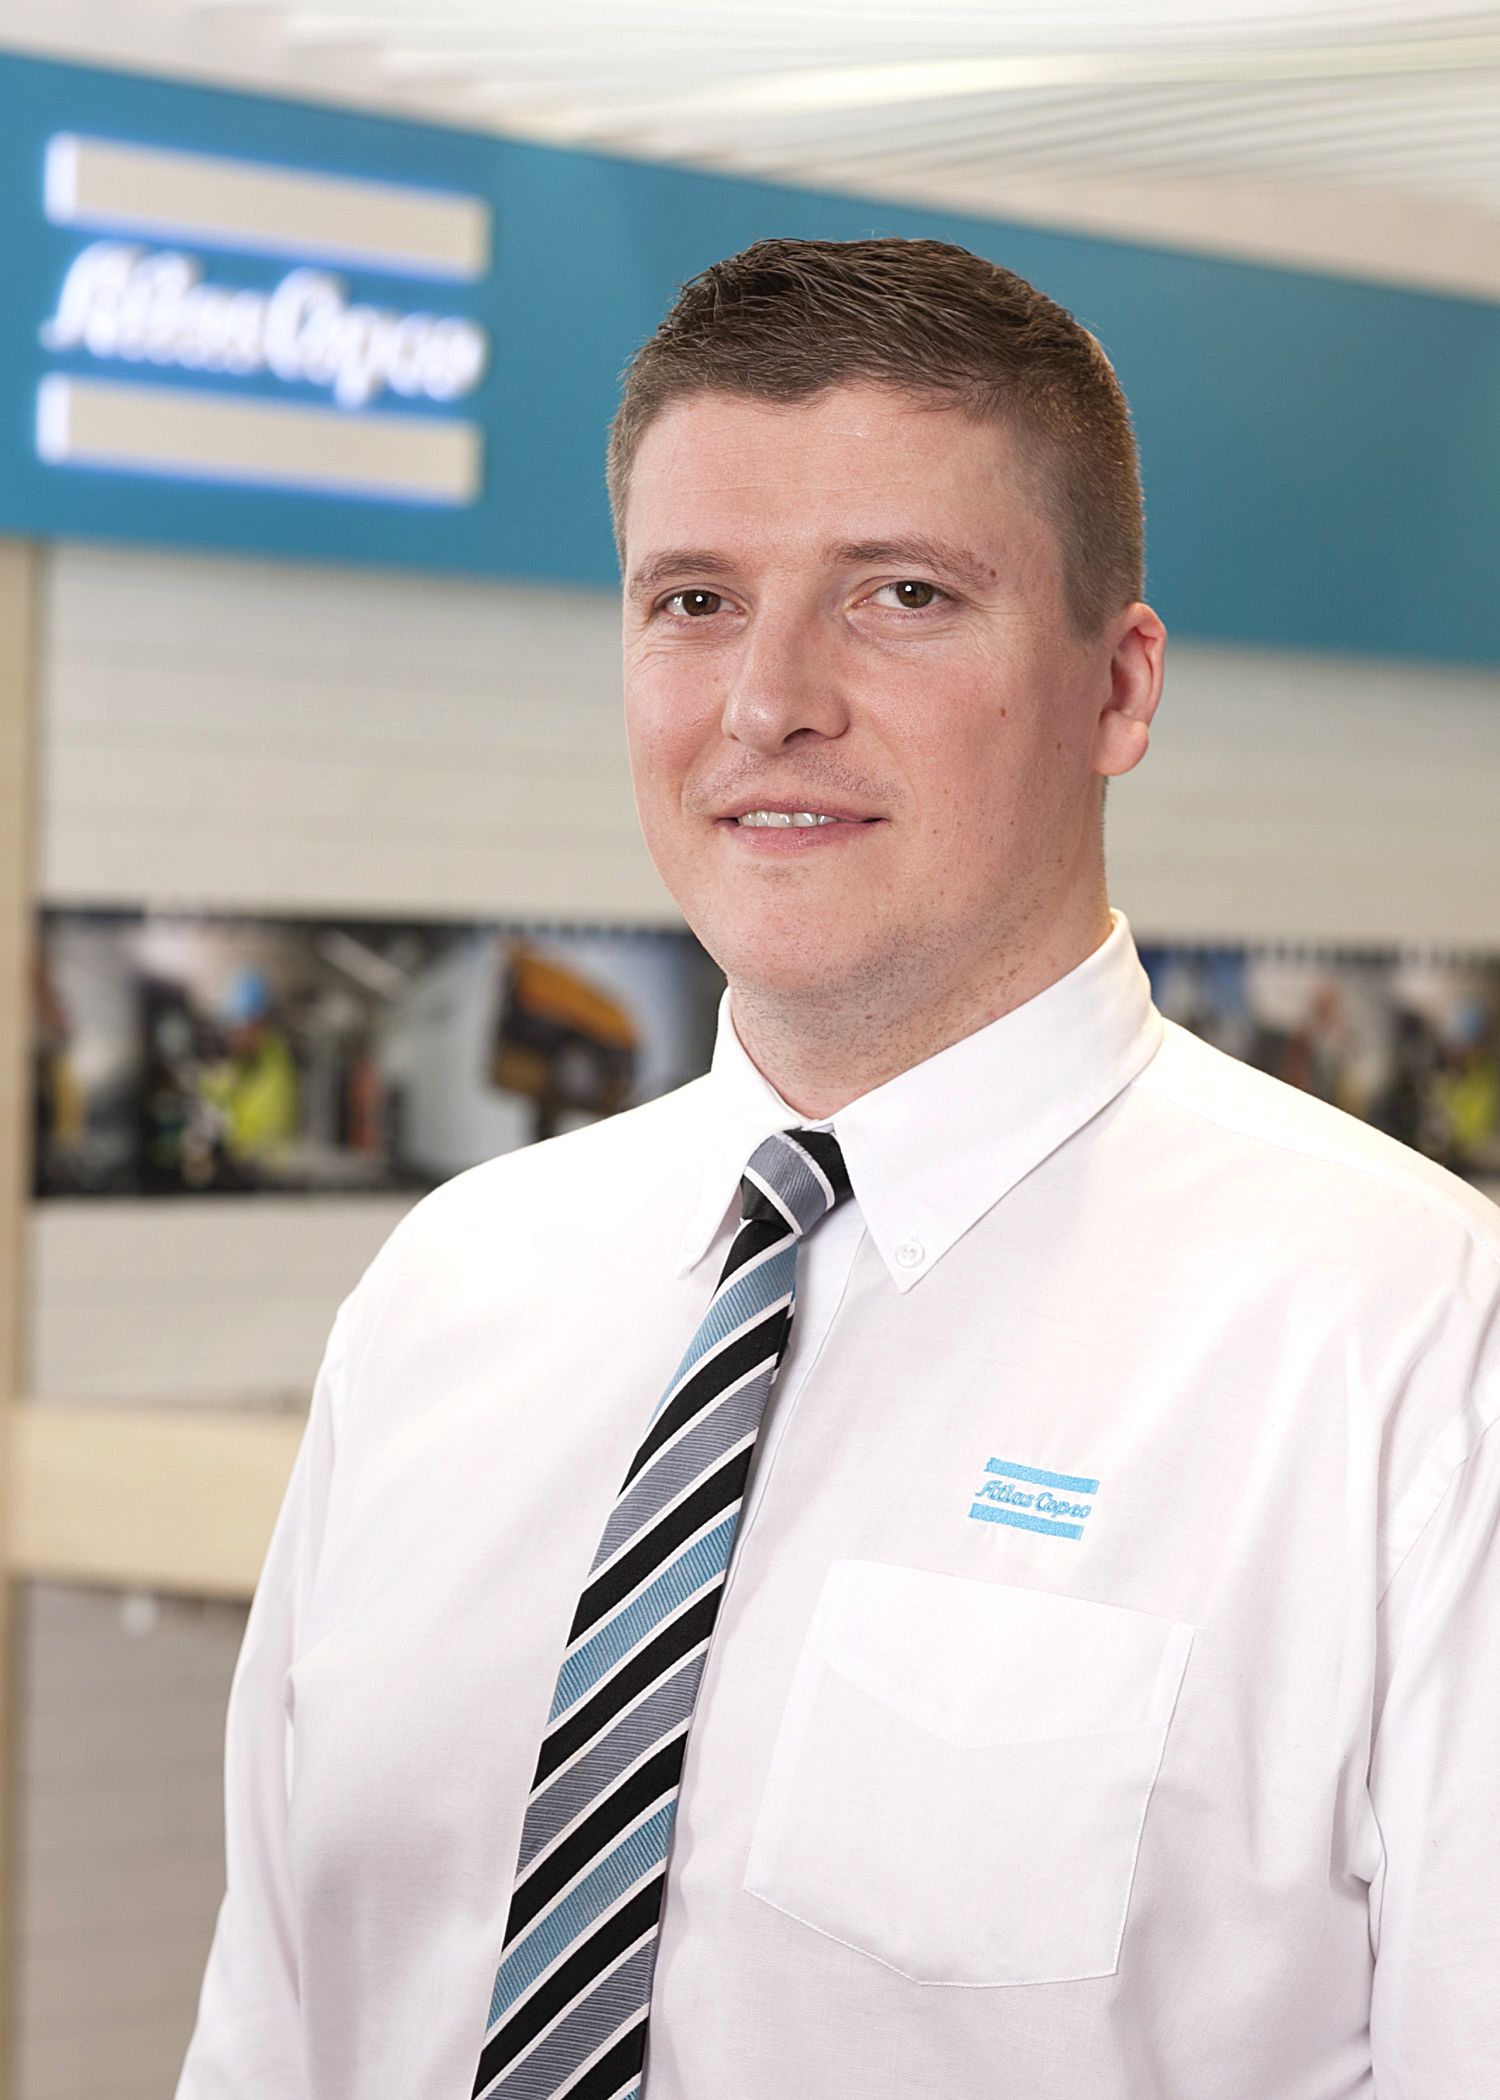 Atlas Copco Compressors appoints Chris Ferriday as Business Line Manager, Process Cooling Solutions